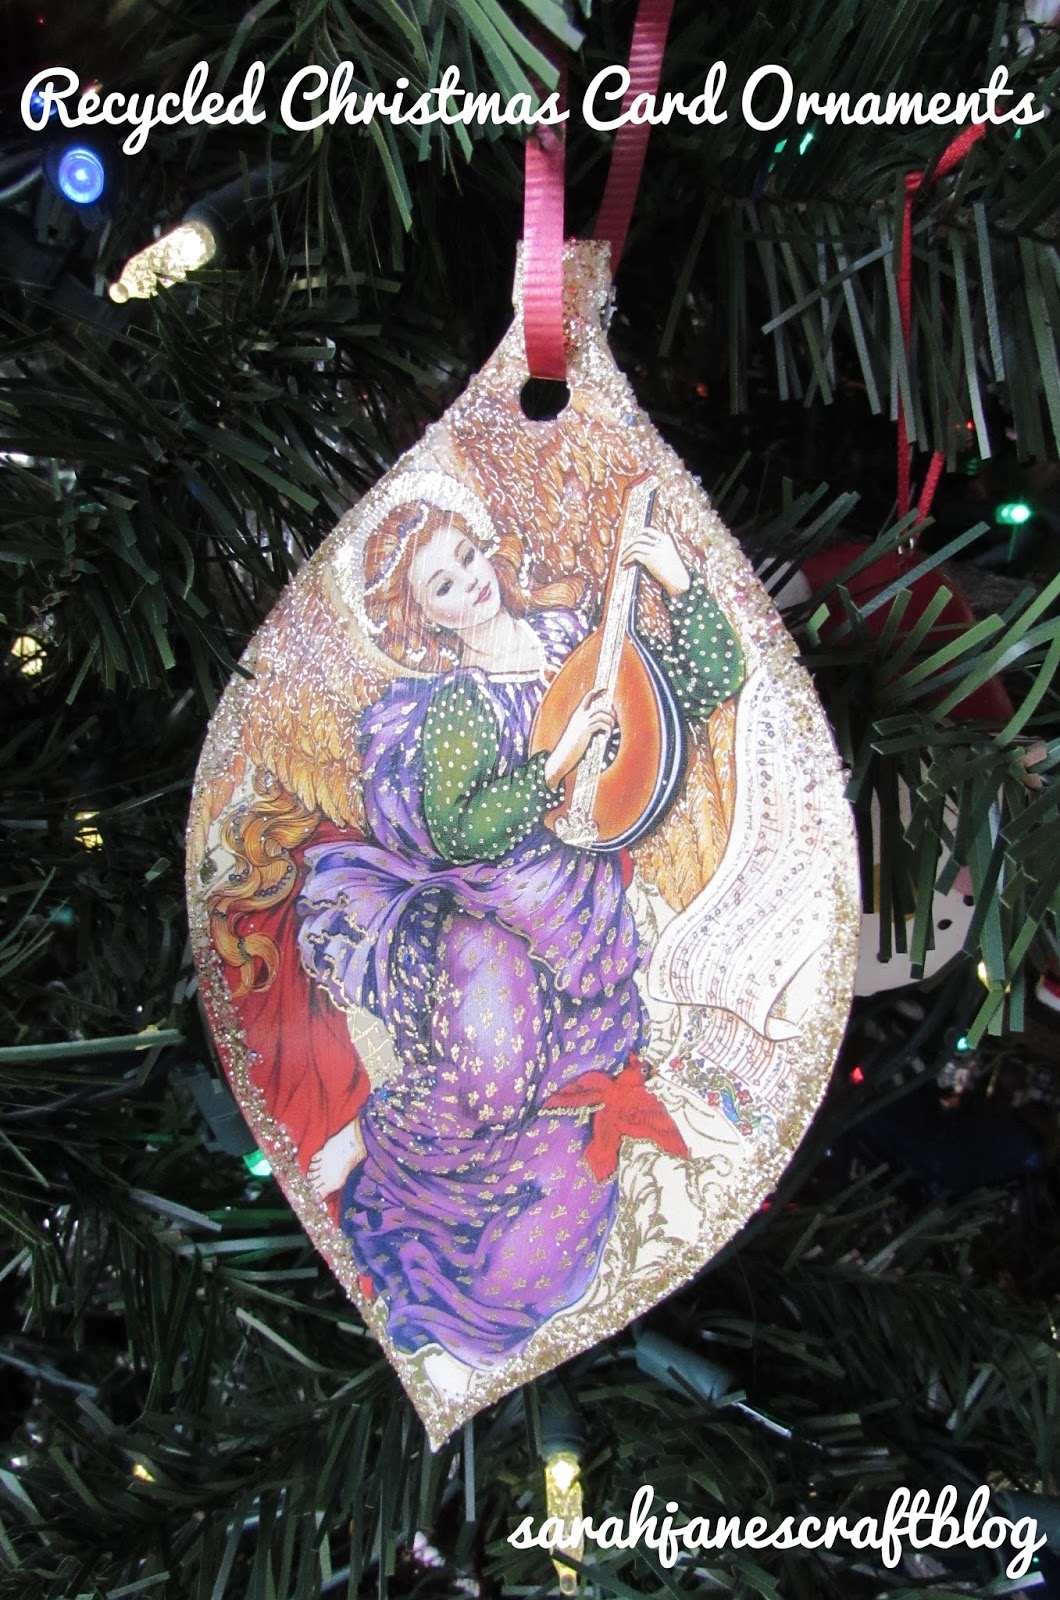 sarah-jane-s-craft-blog-recycled-christmas-card-ornaments-part-2